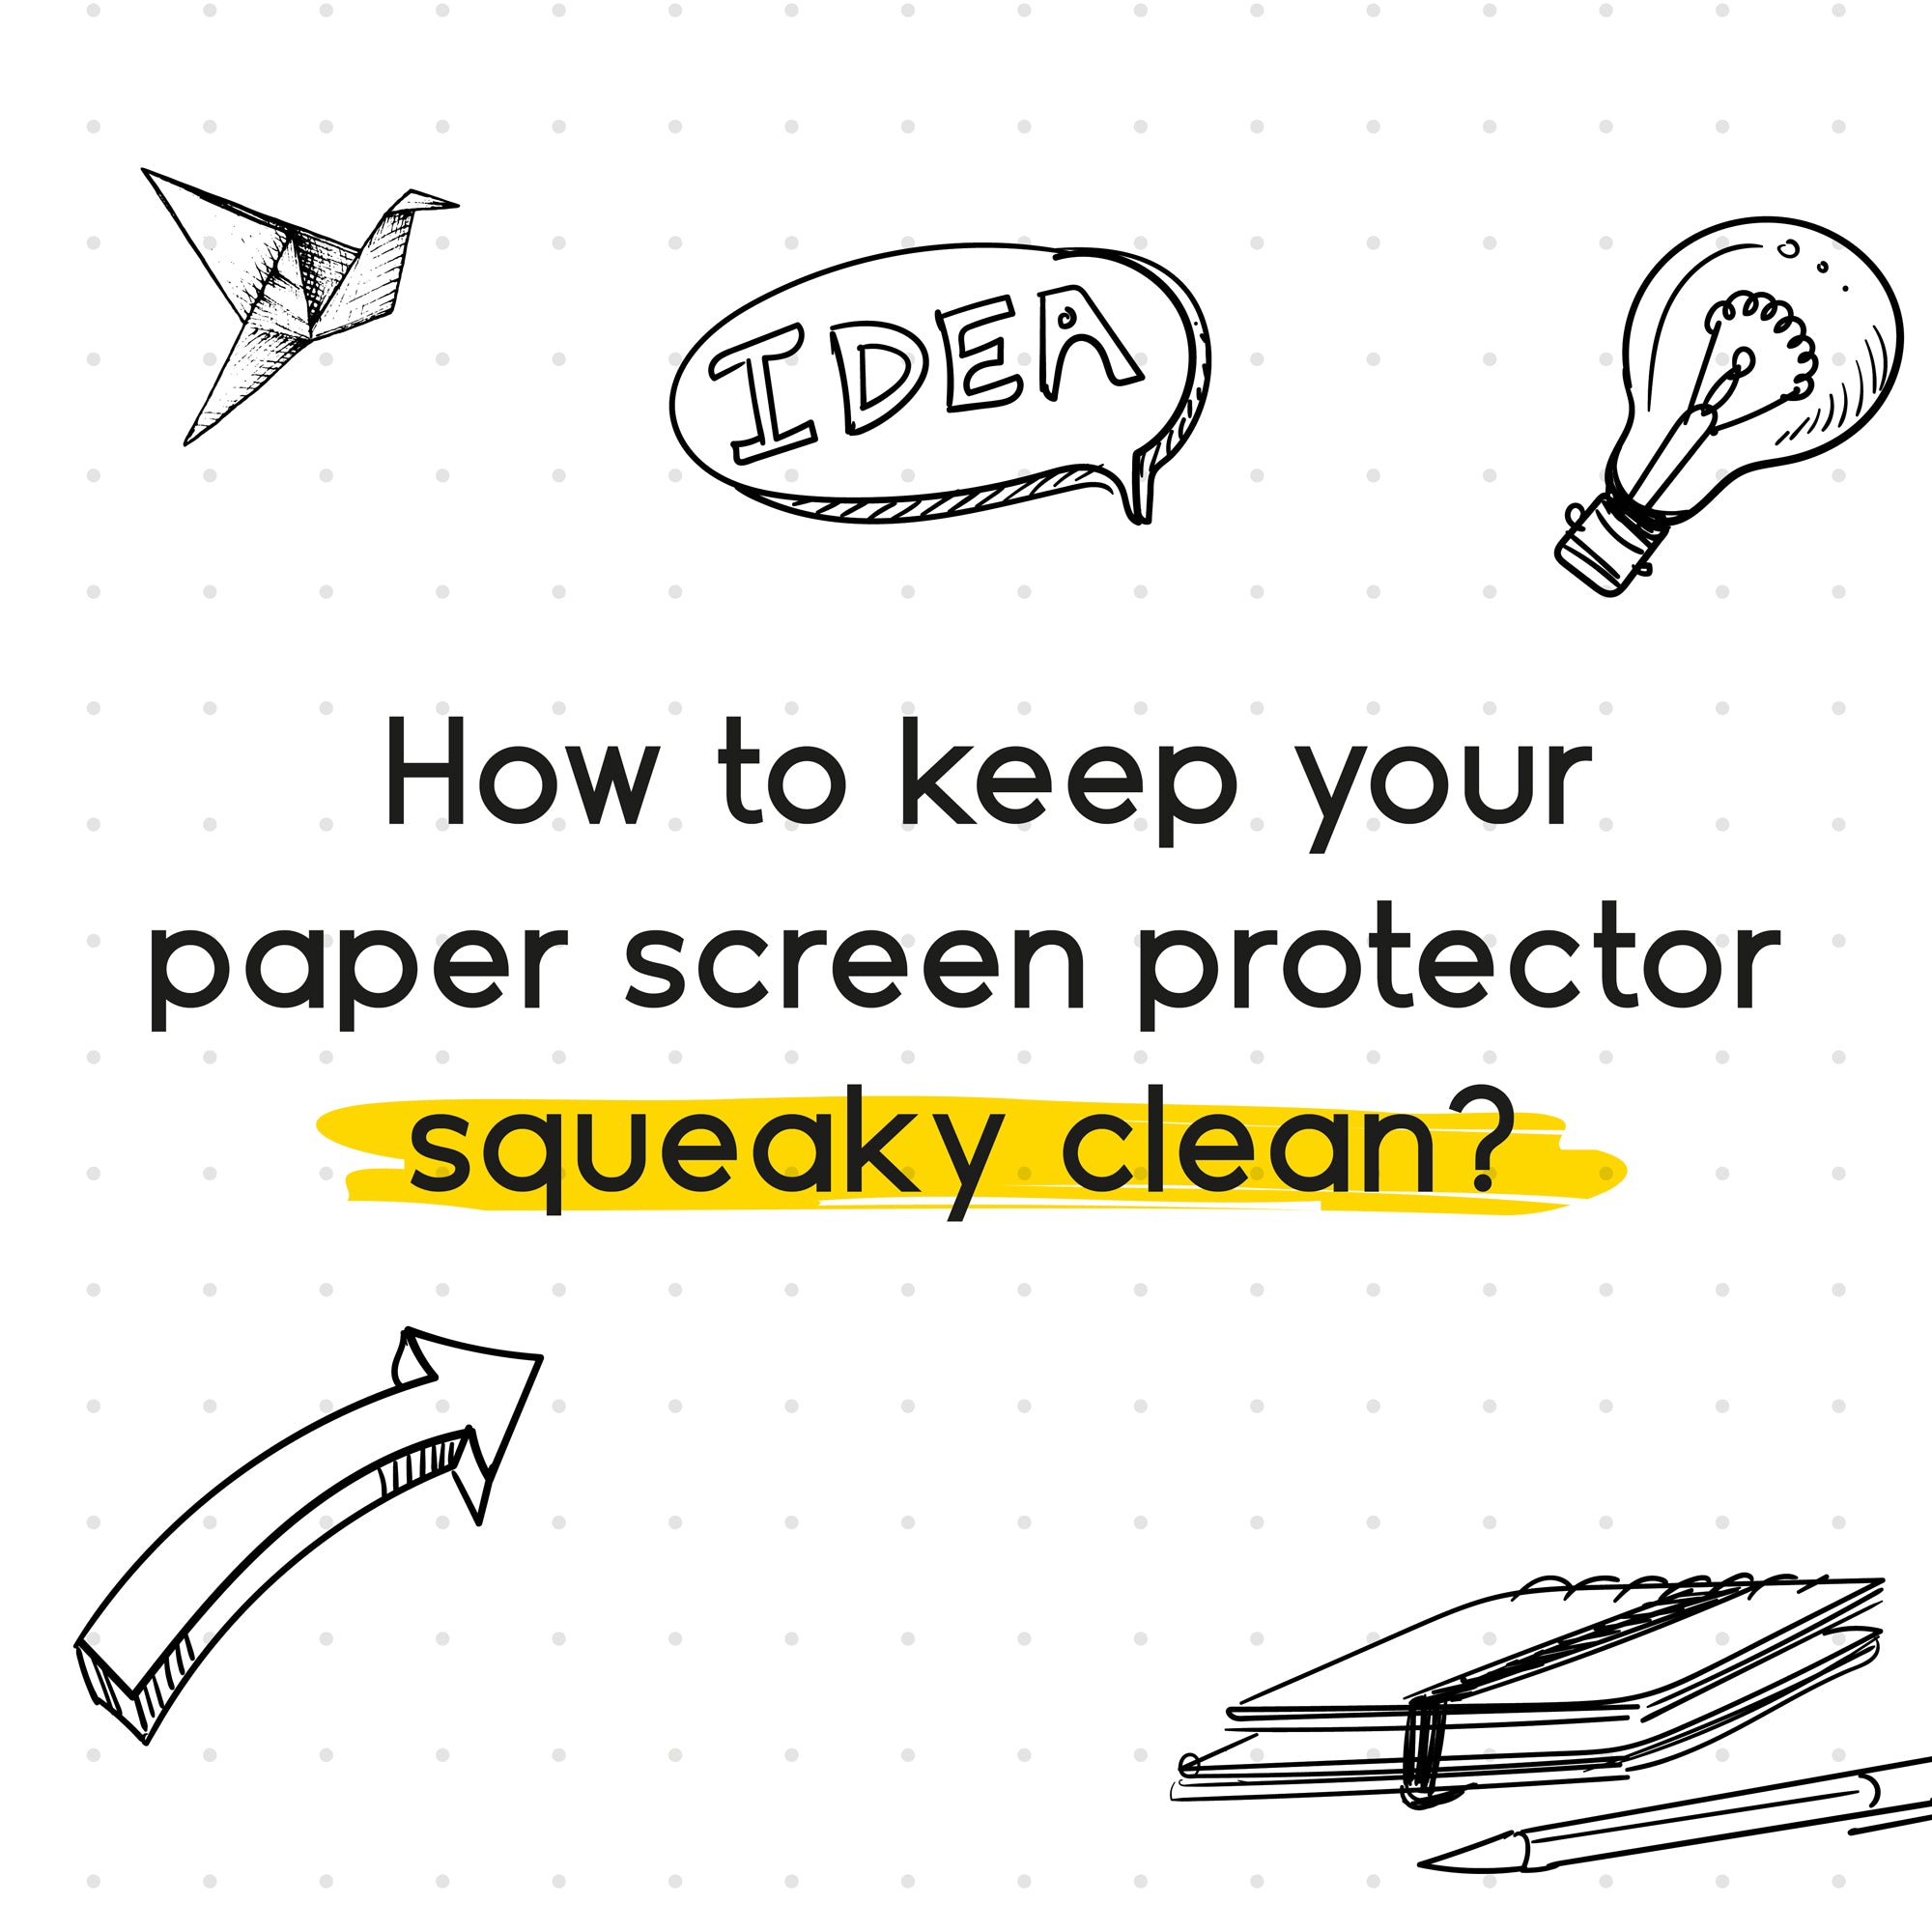 How to clean your paper screen protector?